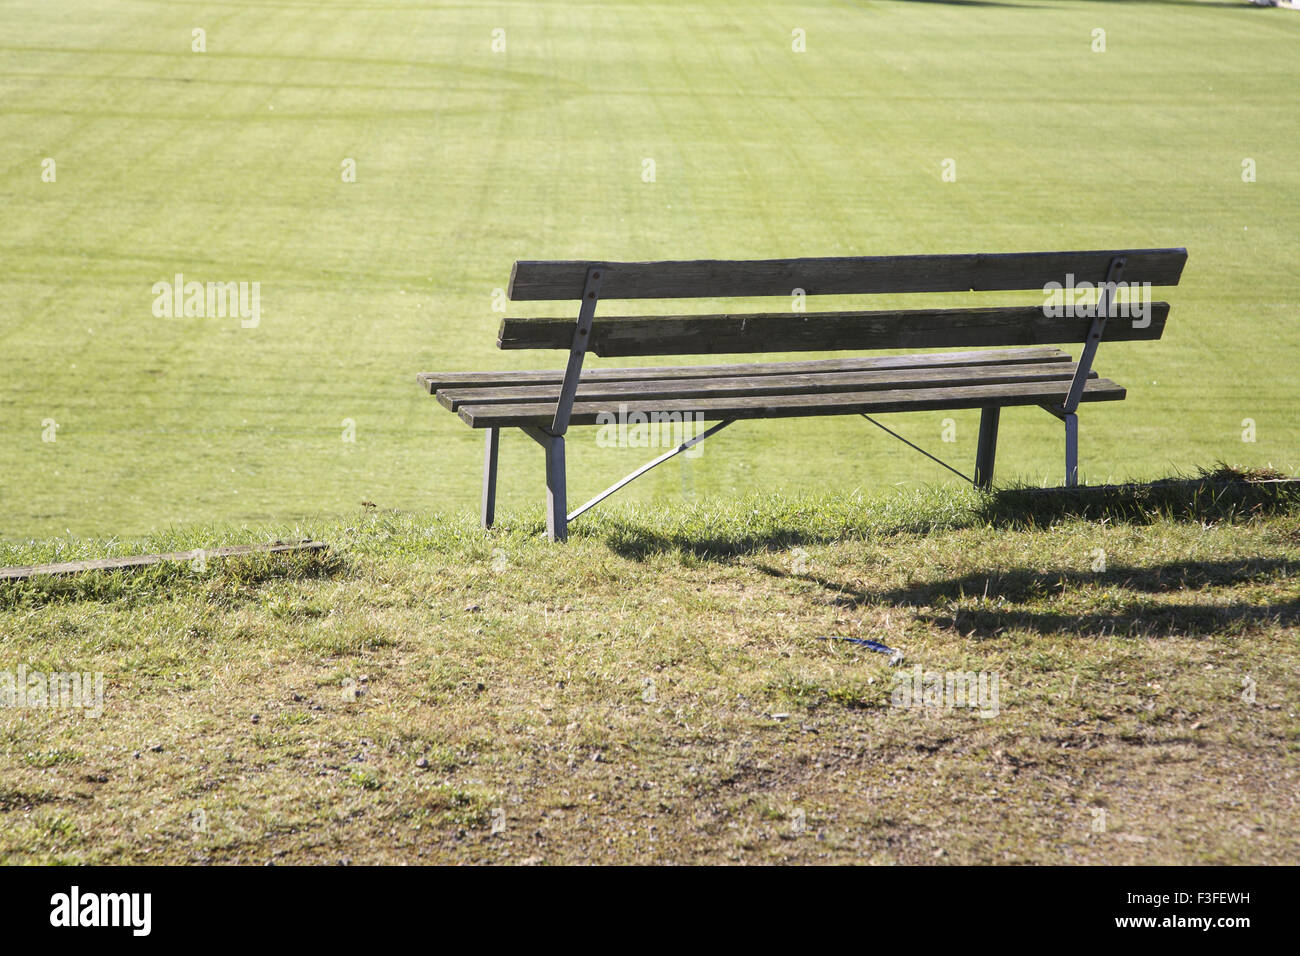 Wooden bench for sitting near football ground ; Sweden Stock Photo